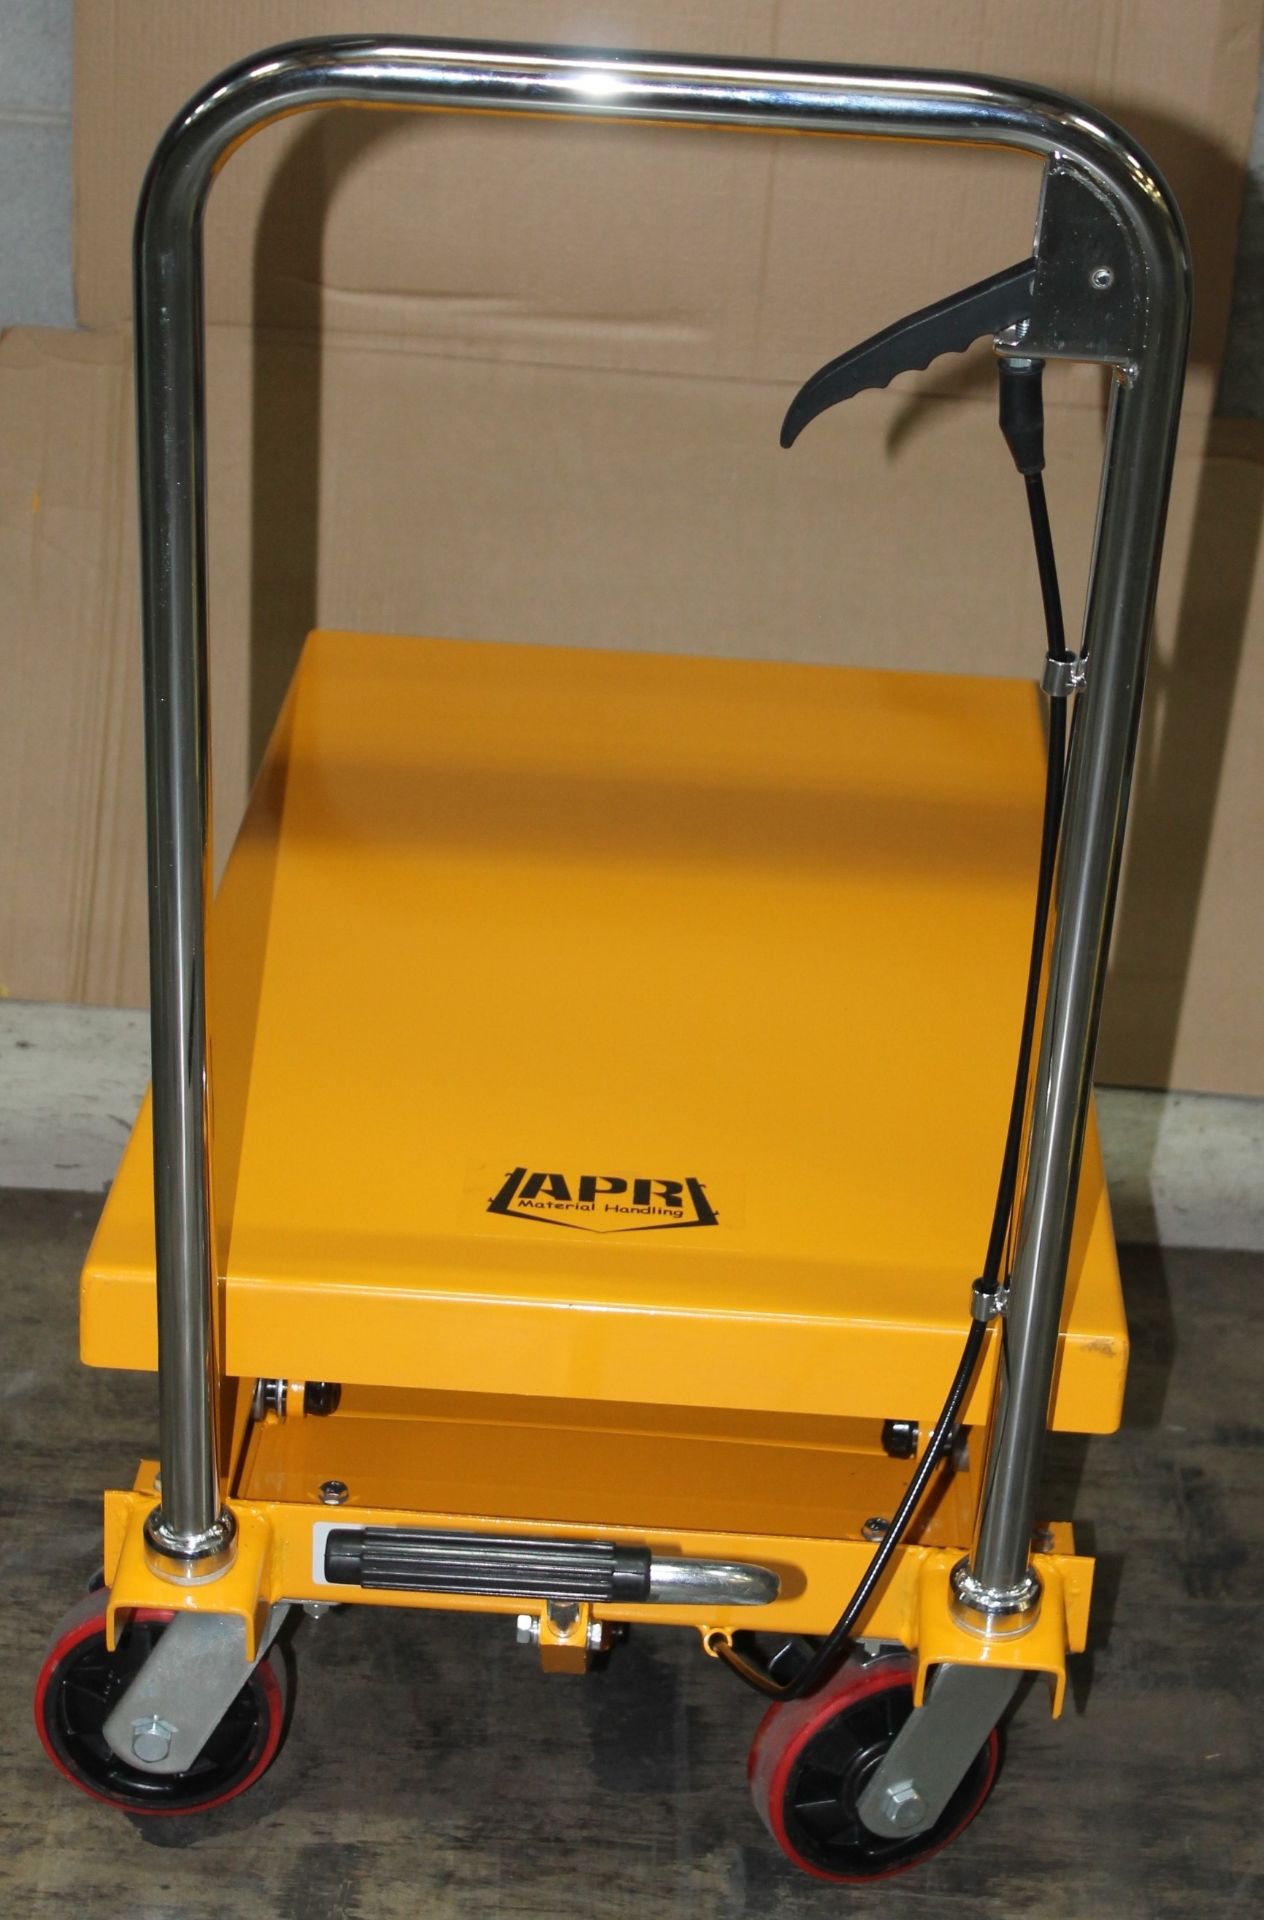 770 LBS CAP DOUBLE SCISSORS HYDRAULIC LIFTING TABLE - Image 2 of 3